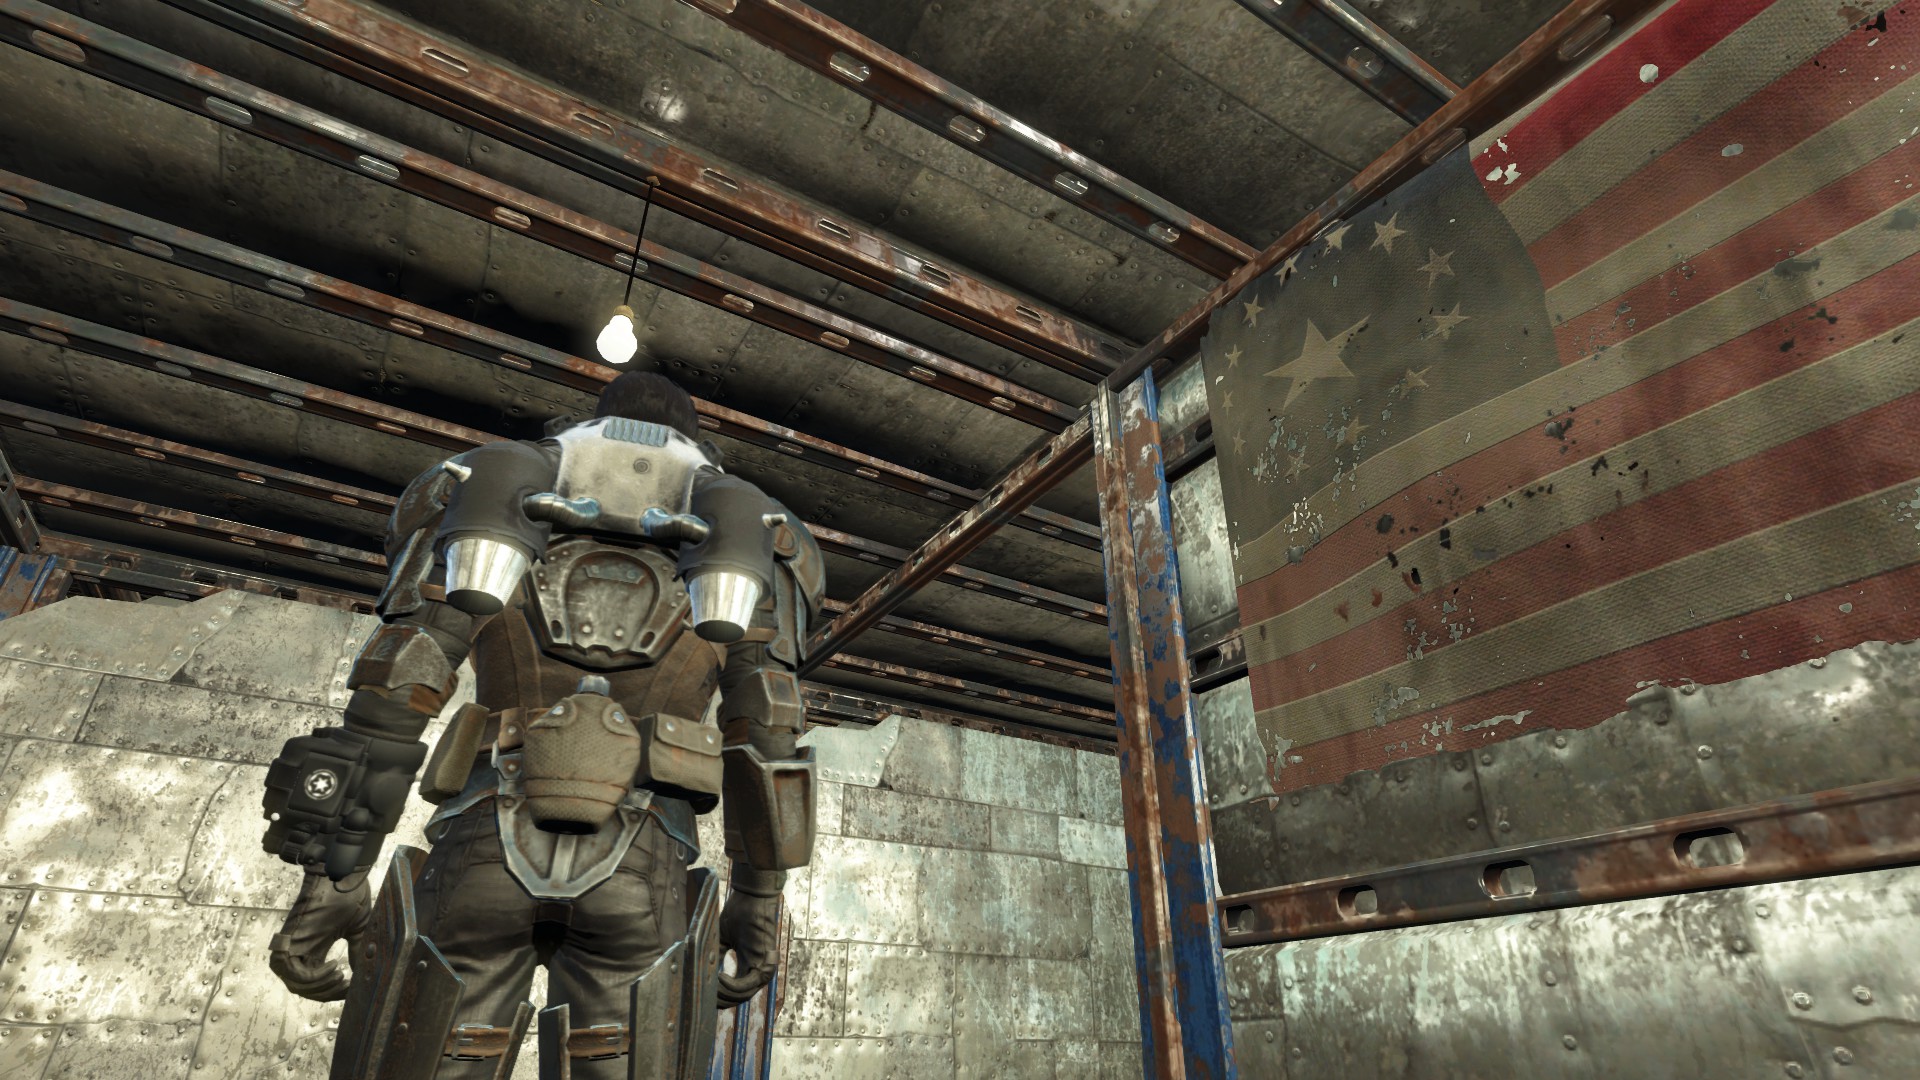 Fallout 4 mod allows you to use a Jetpack outside of Power Armour